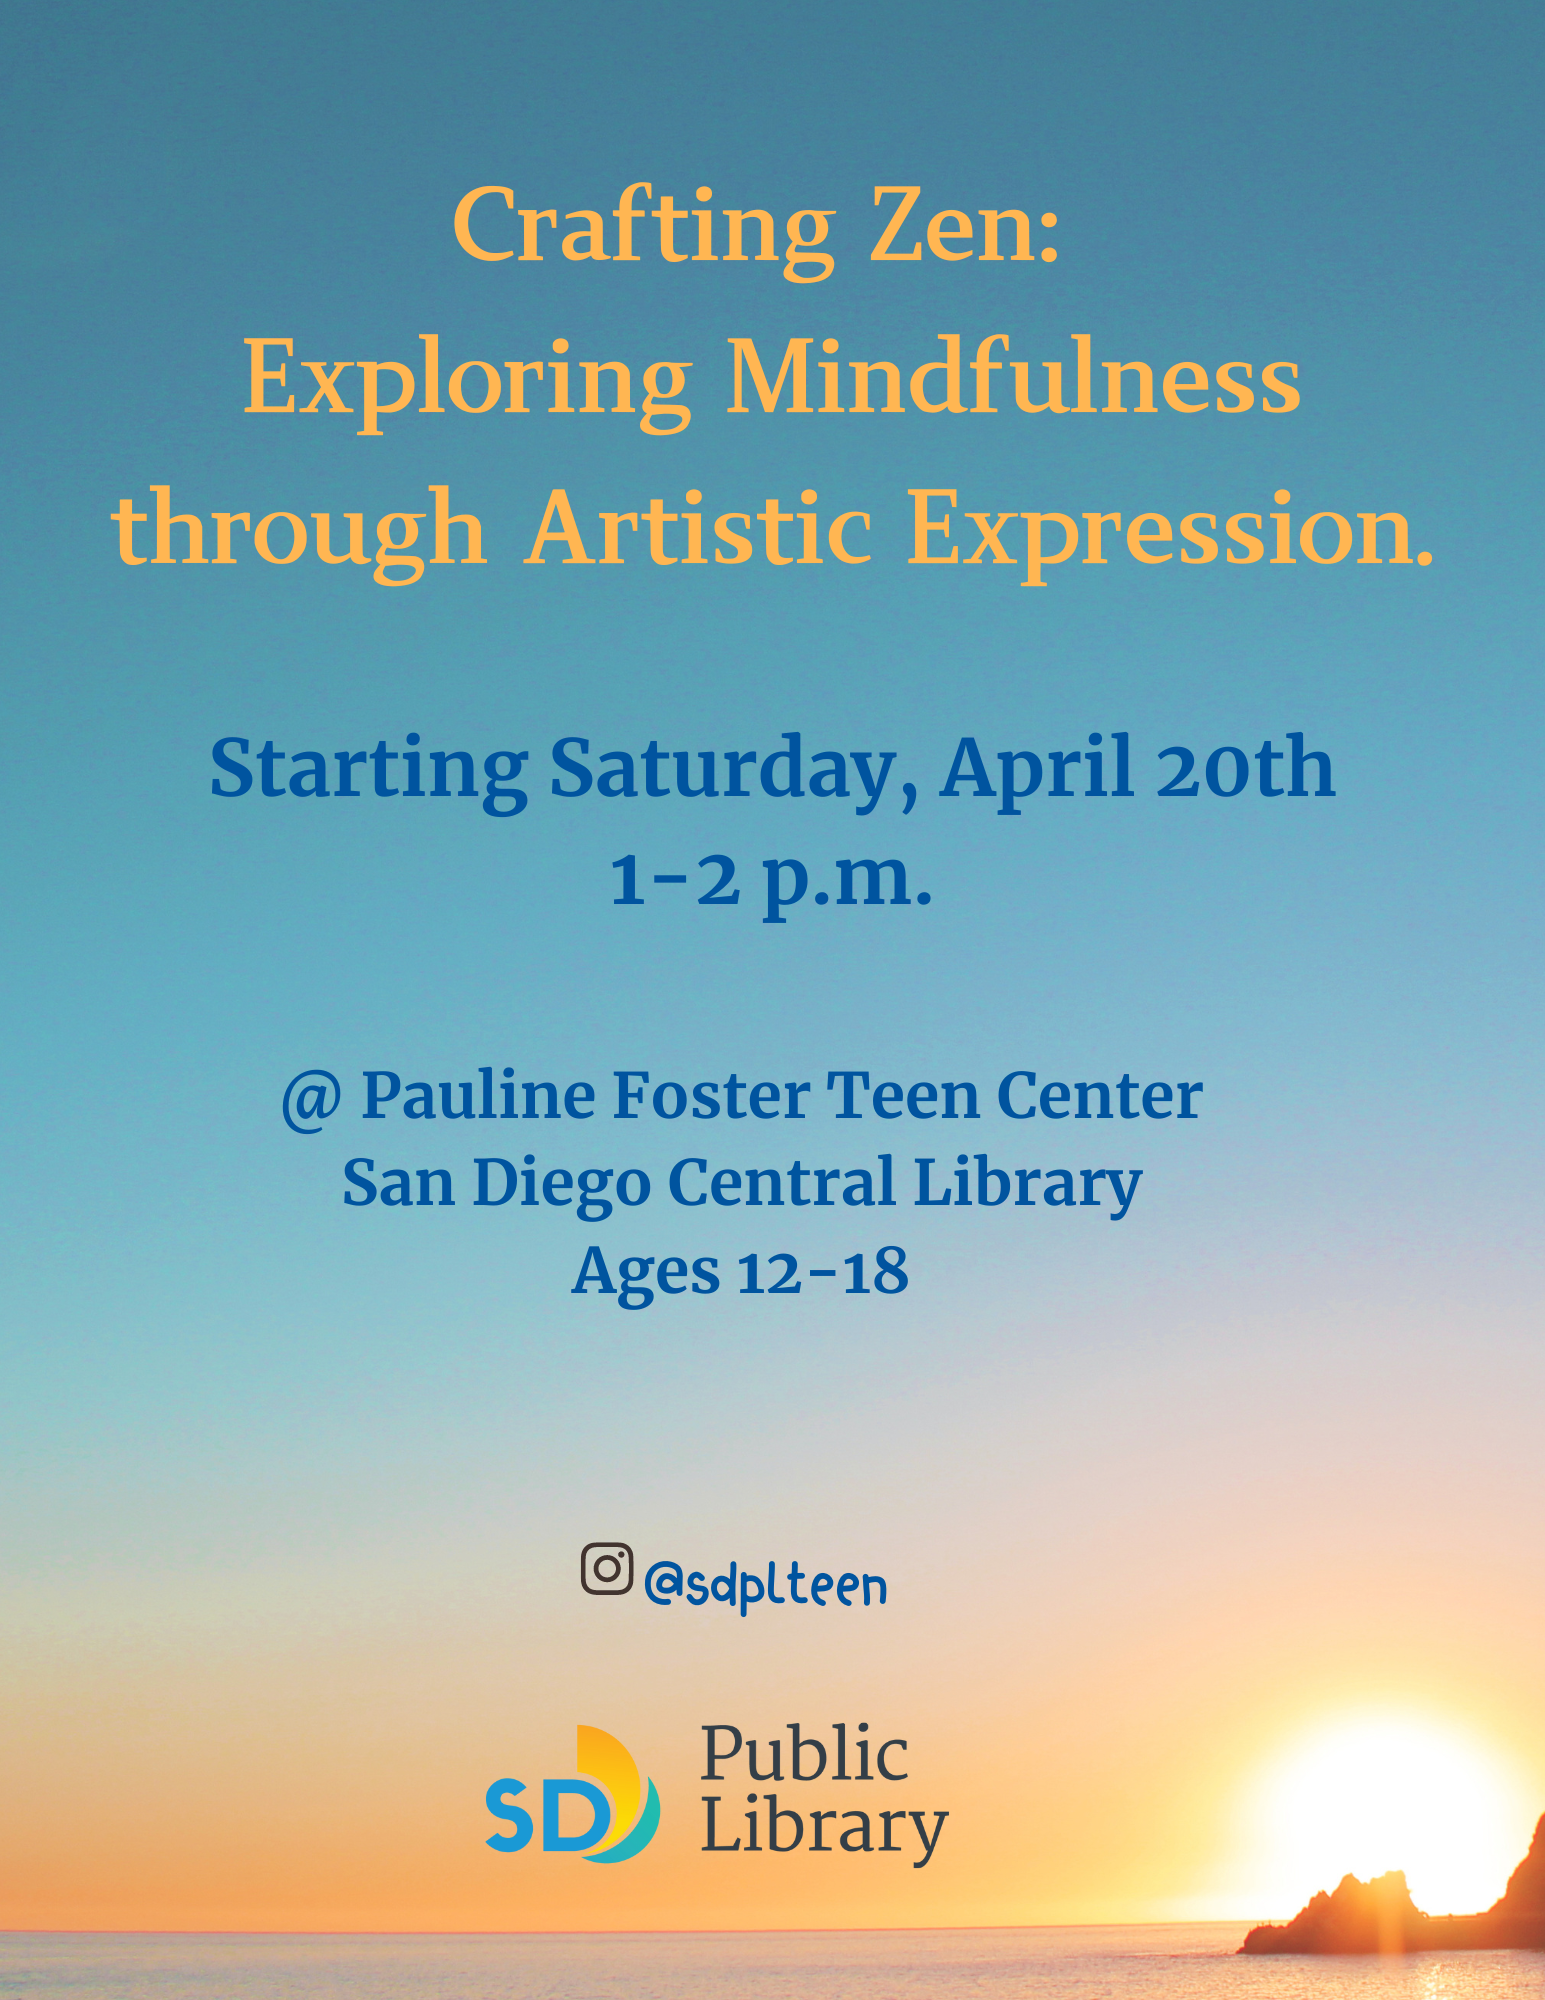 Crafting Zen:  Exploring Mindfulness through Artistic Expression. Starting Saturday, April 20th 1-2 p.m. @ Pauline Foster Teen Center  San Diego Central Library Ages 12-18